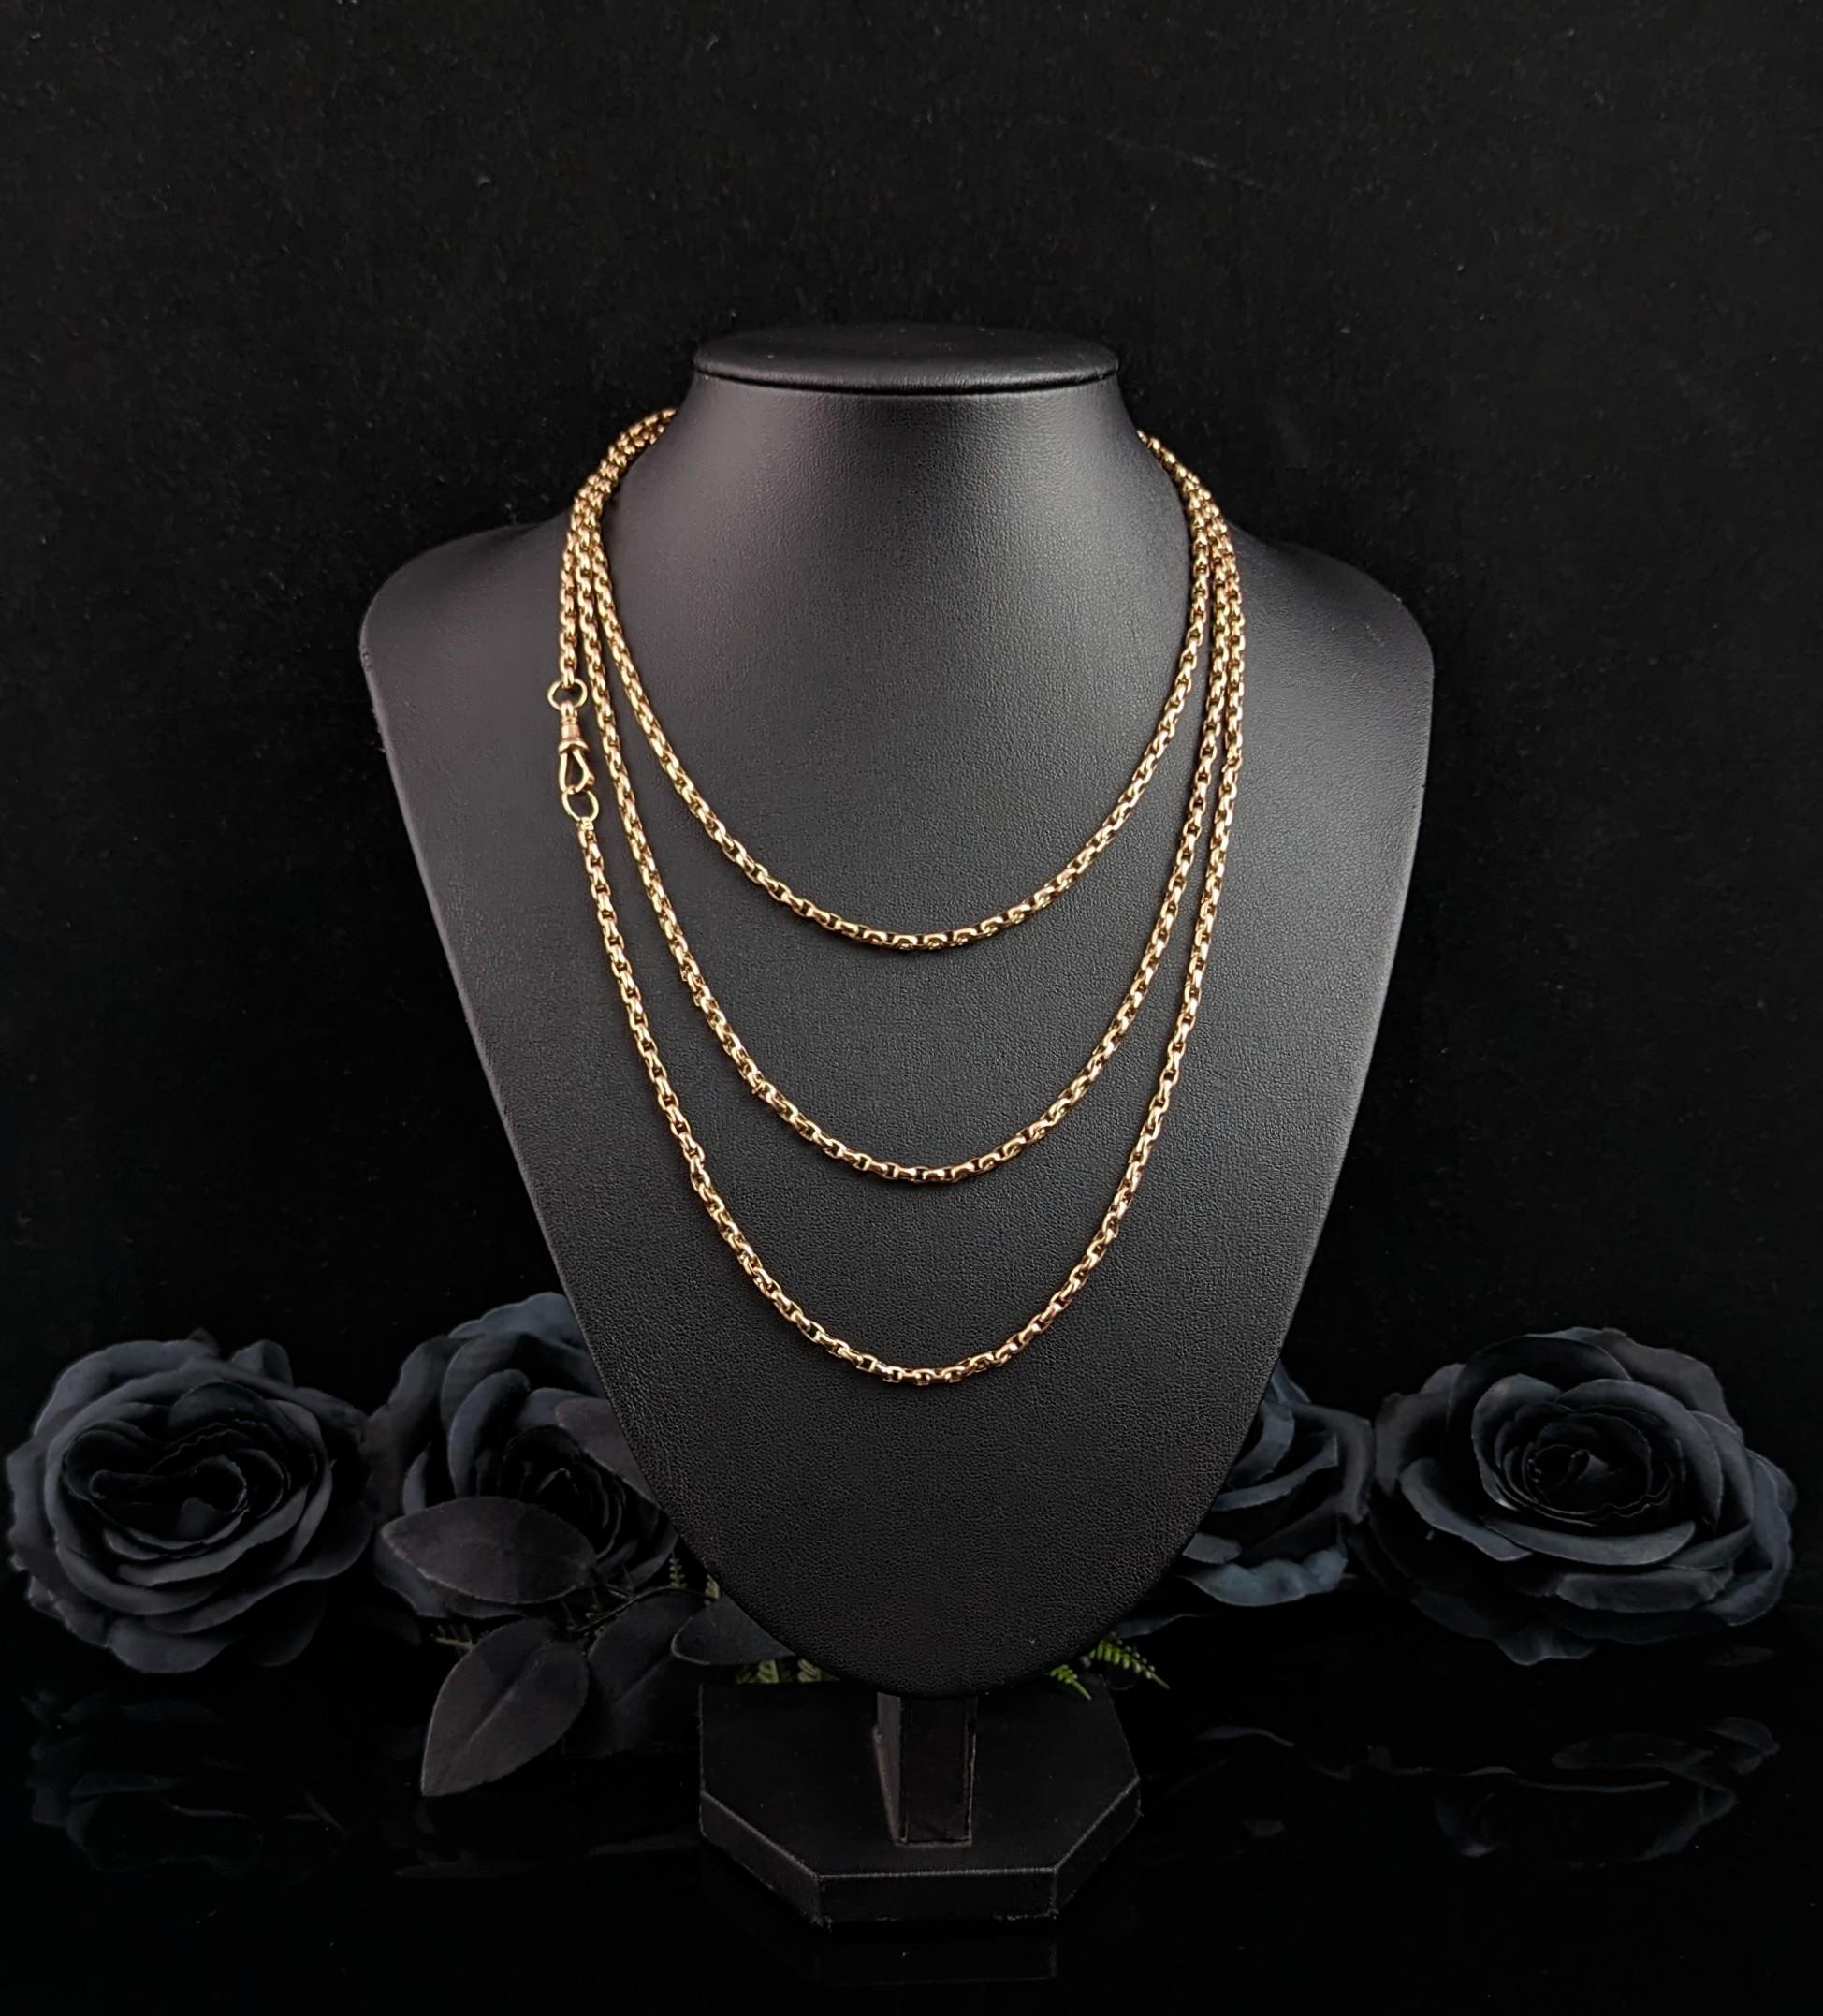 We love a good longuard chain here, such a versatile and wearable piece of jewellery, this antique 9kt gold one is no exception.

You really can't go wrong with a good long chain as they can be worn in so many ways and adorned with so many different